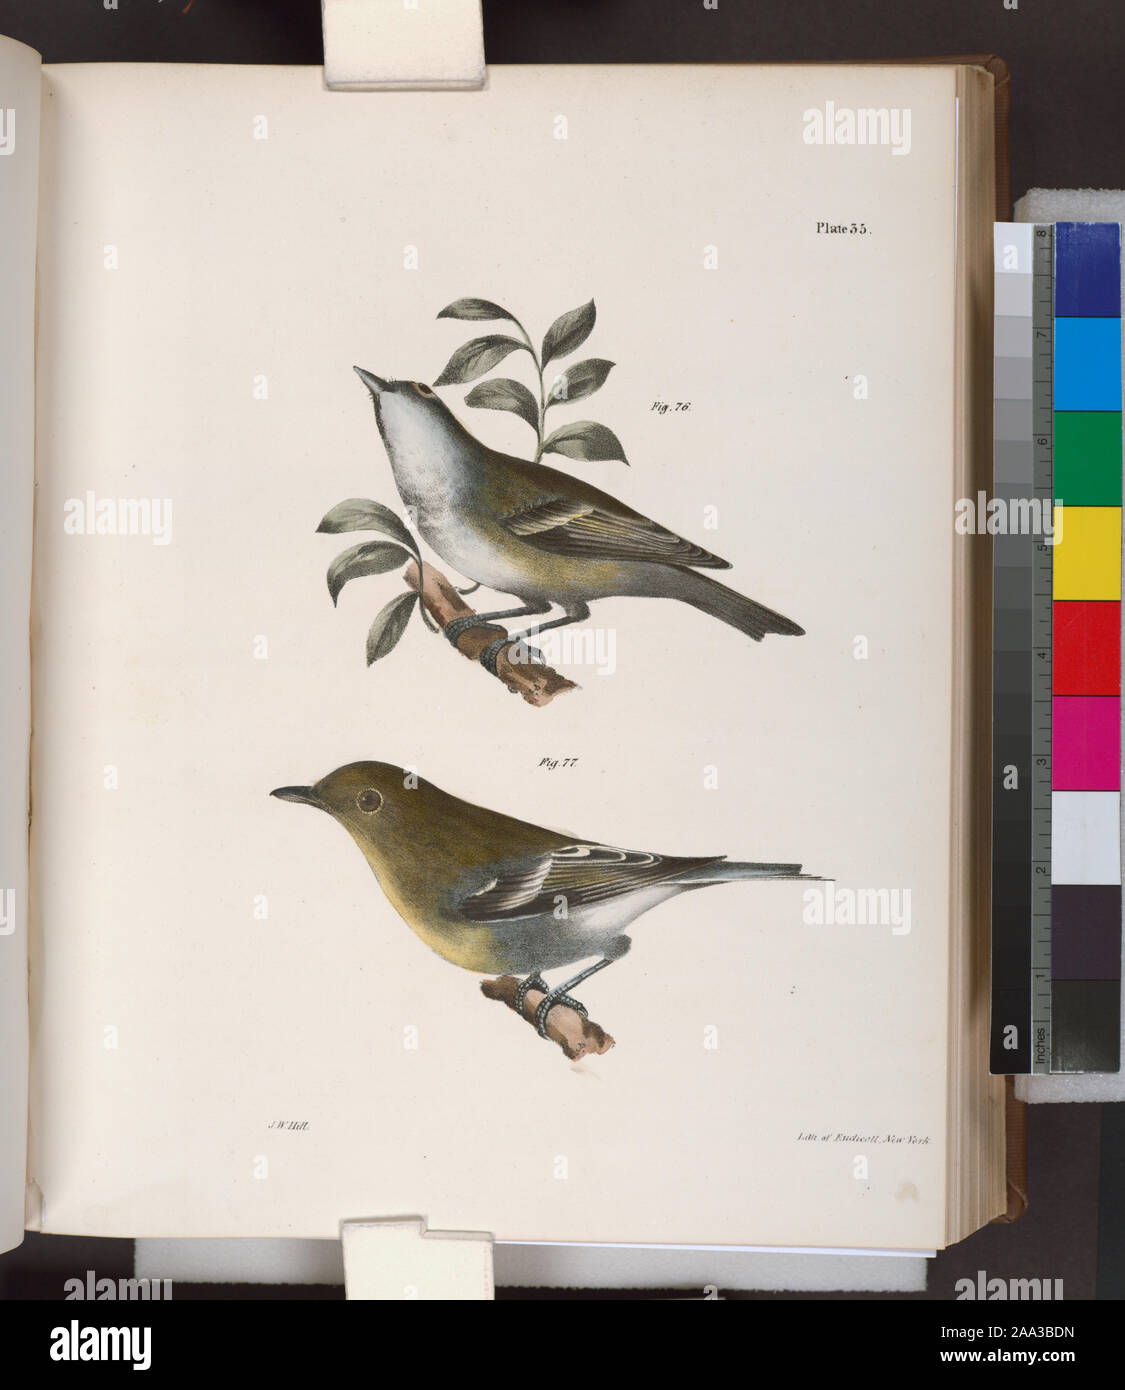 76. The Solitary Greenlet (Vireo solitarius). 77. The Yellow-throated Greenlet (Vireo flavifrons).; 76. The Solitary Greenlet (Vireo solitarius). 77. The Yellow-throated Greenlet (Vireo flavifrons). Stock Photo